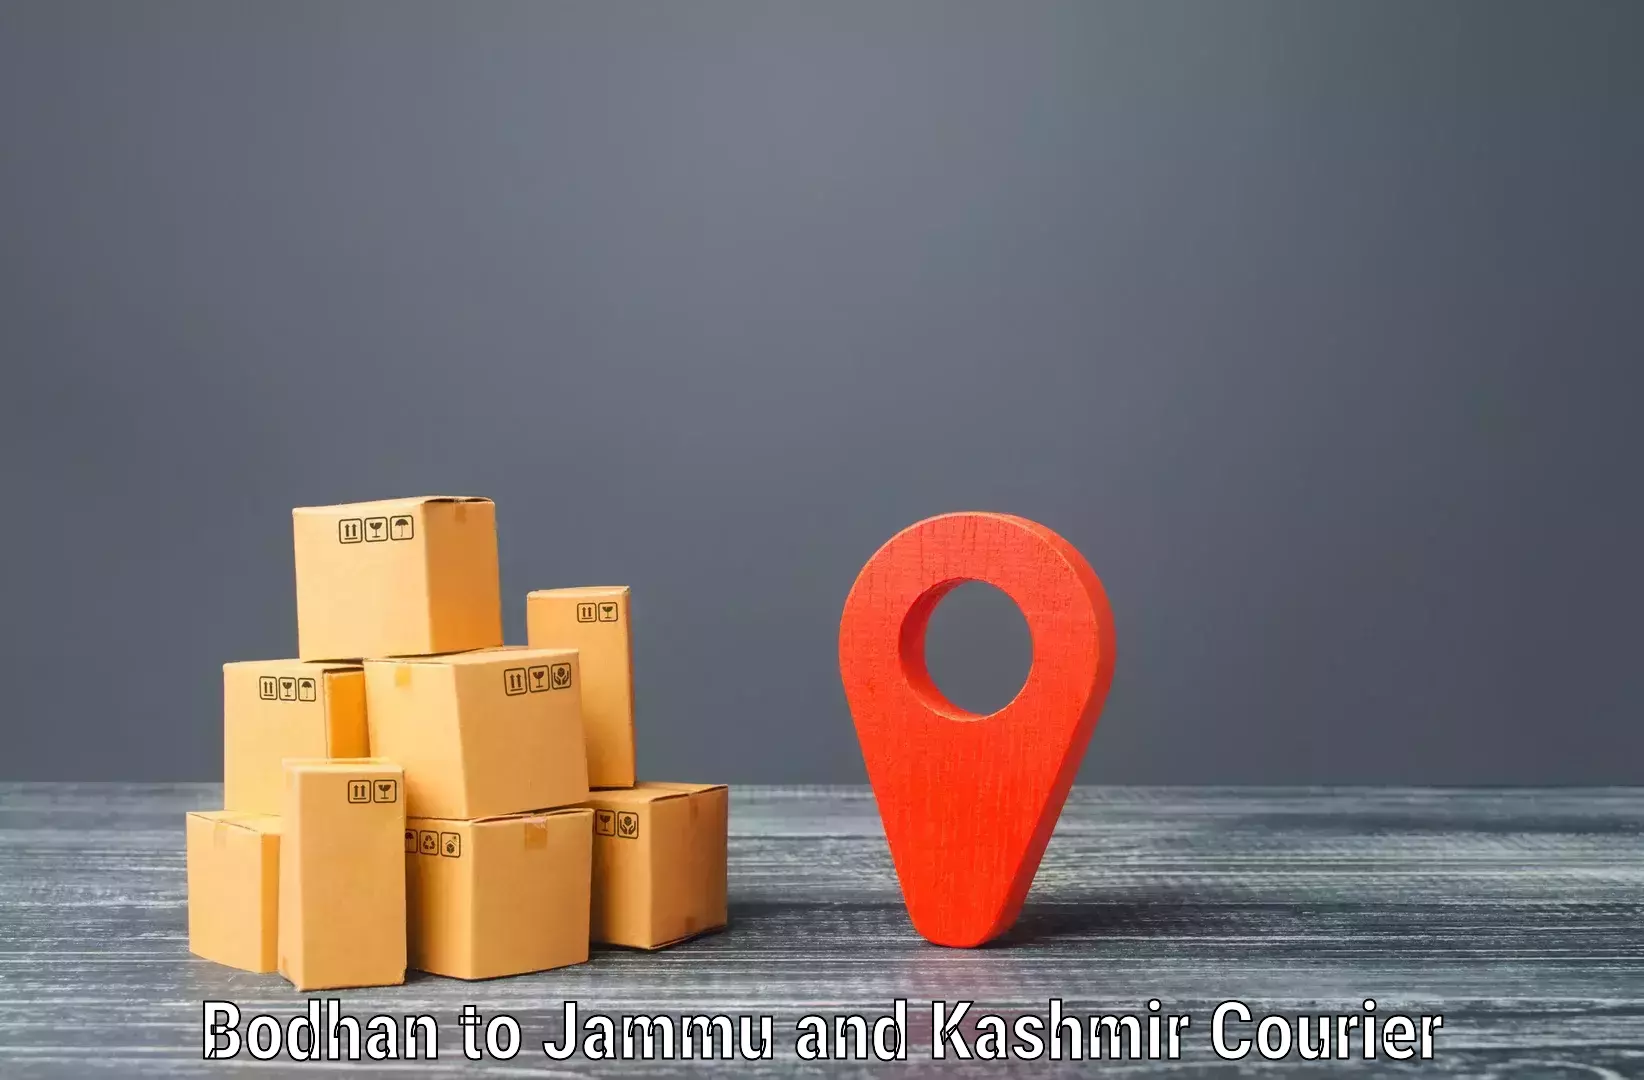 Flexible delivery schedules Bodhan to Kargil